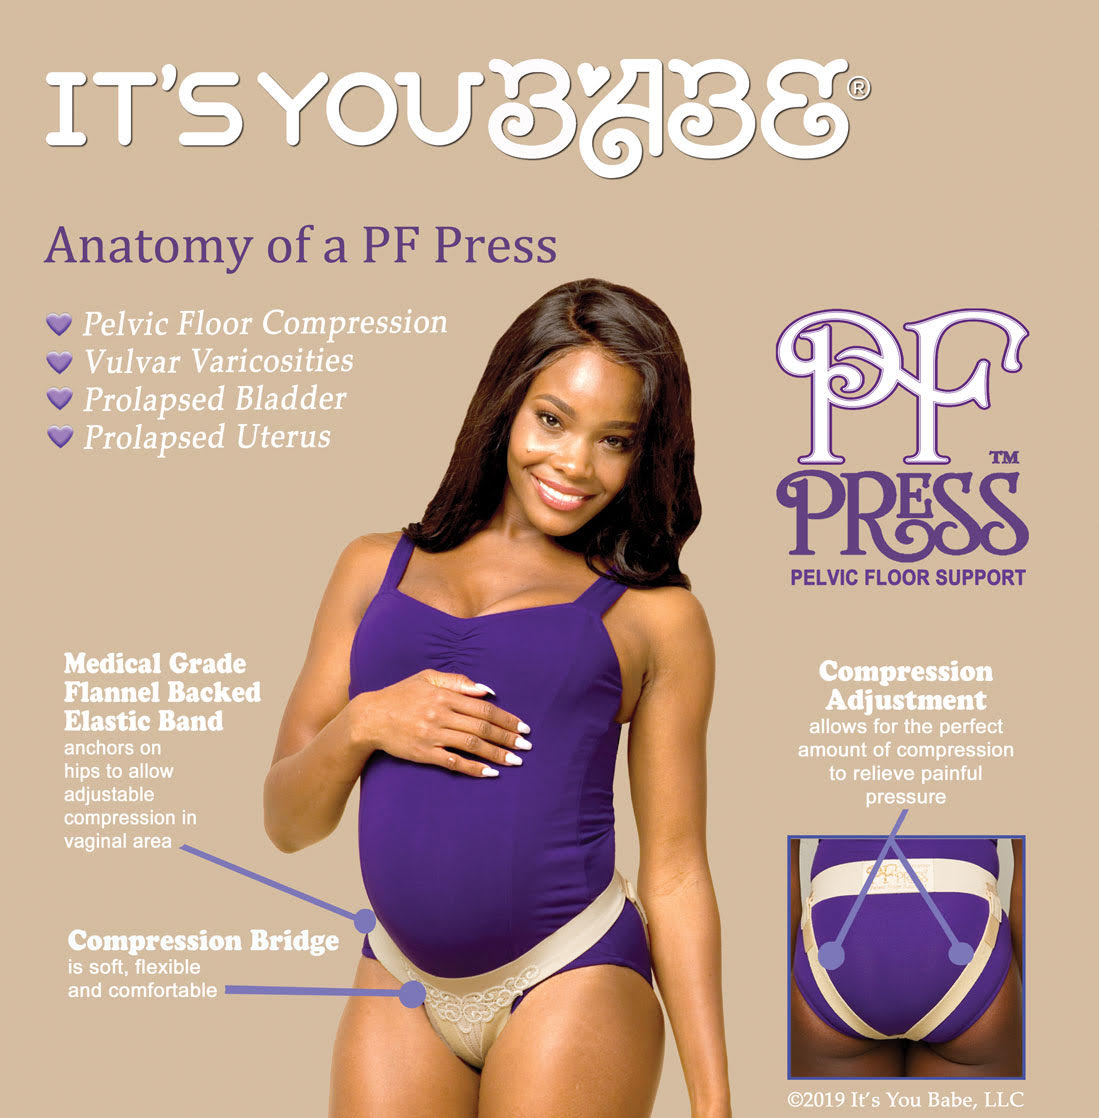 PF Press™ - Pelvic Floor Support ~ It's You Babe